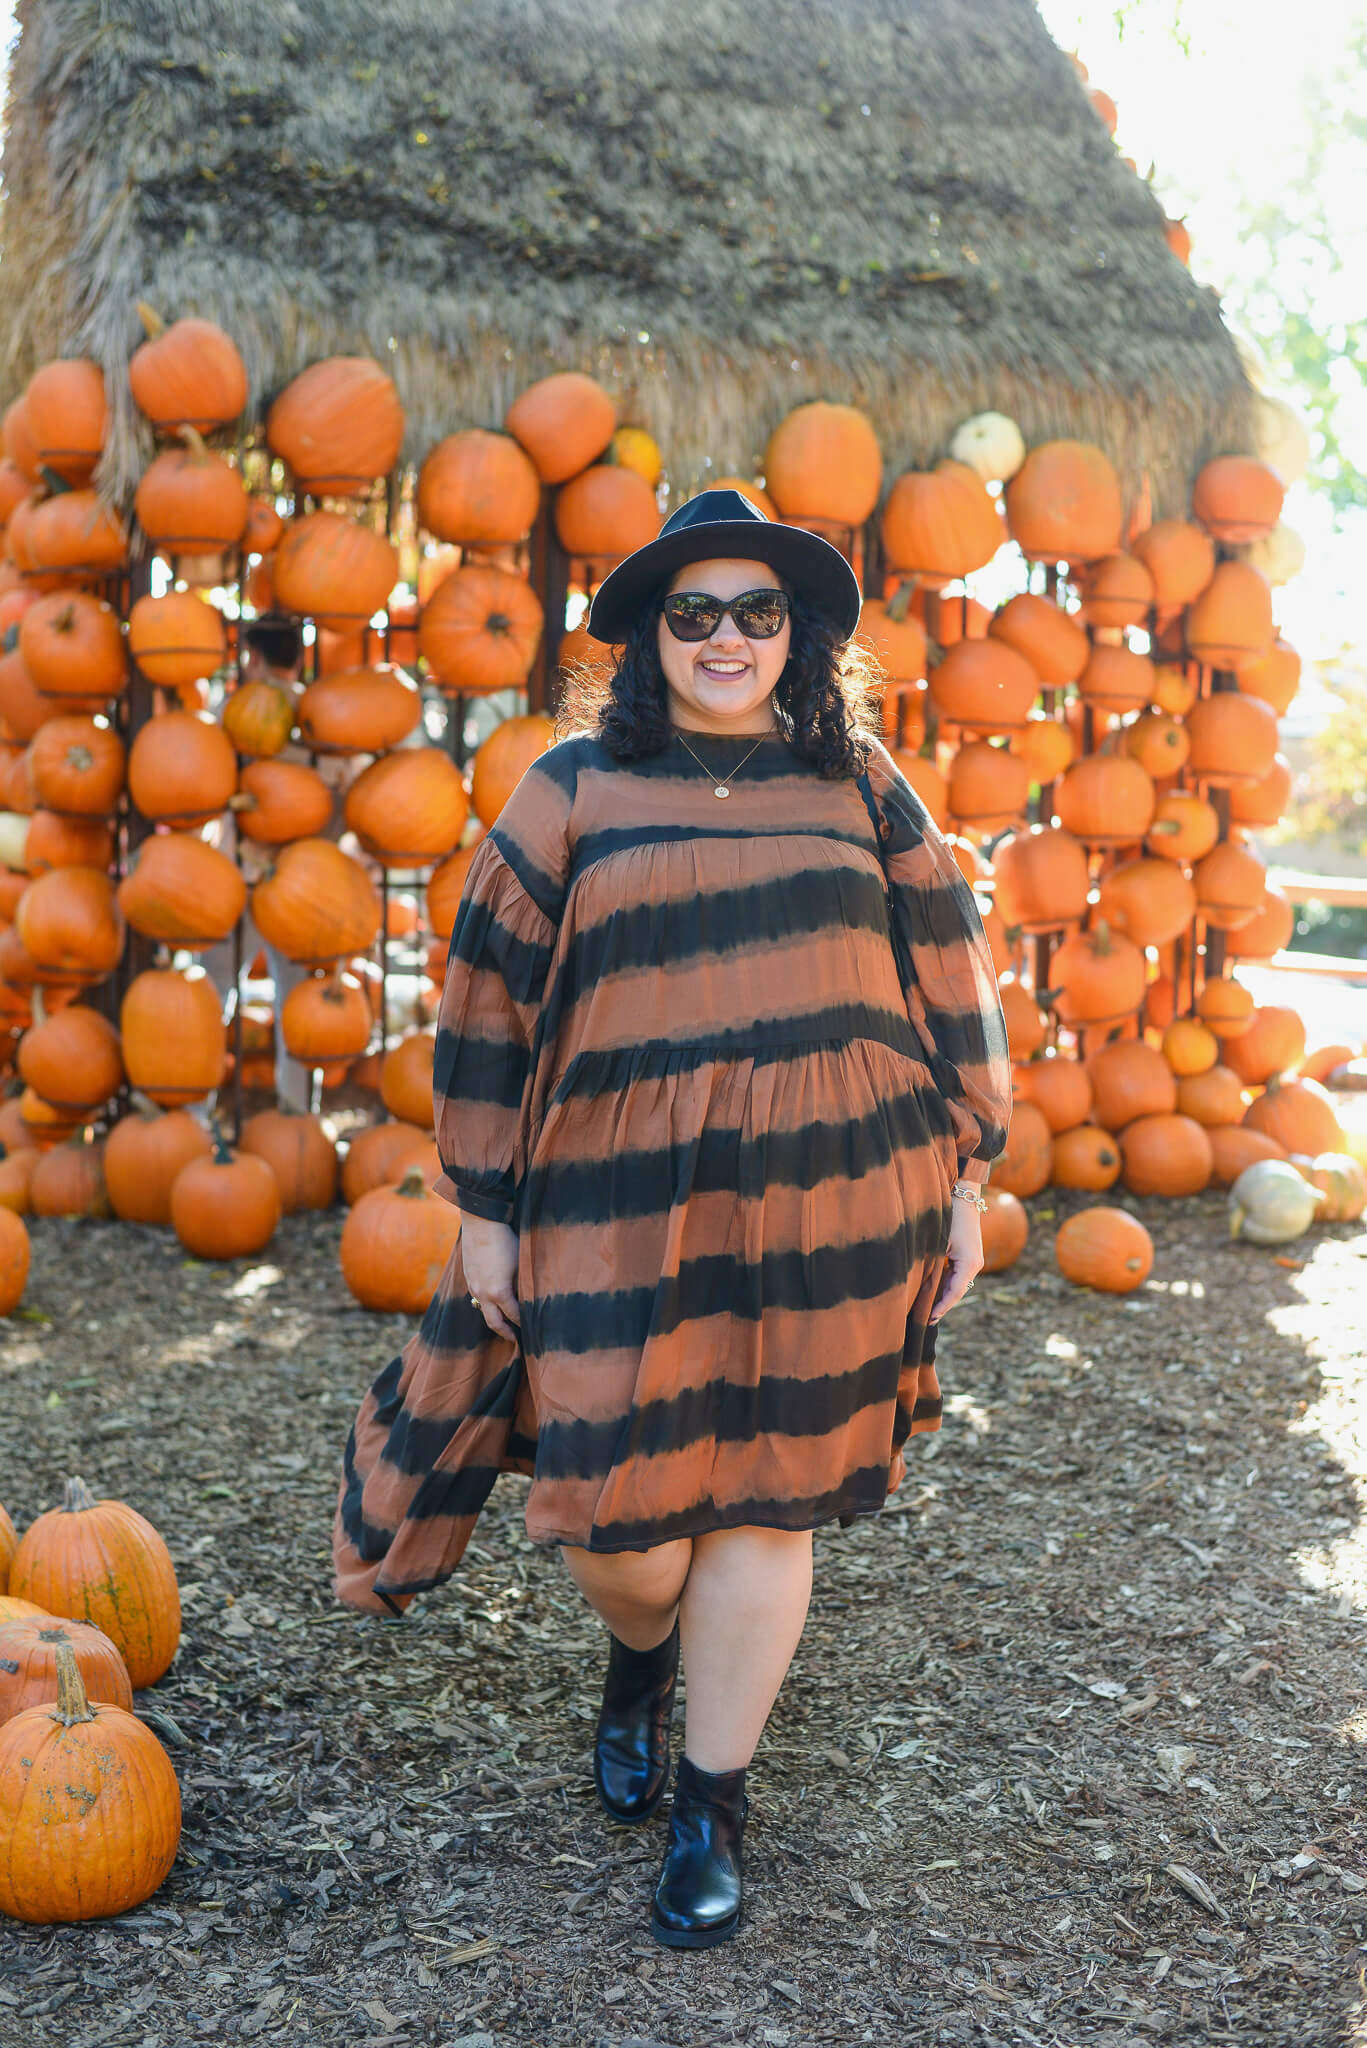 Anthropologie's plus size collection, A+, has been nothing short of it's name and this orange and black tunic does not disappoint. 